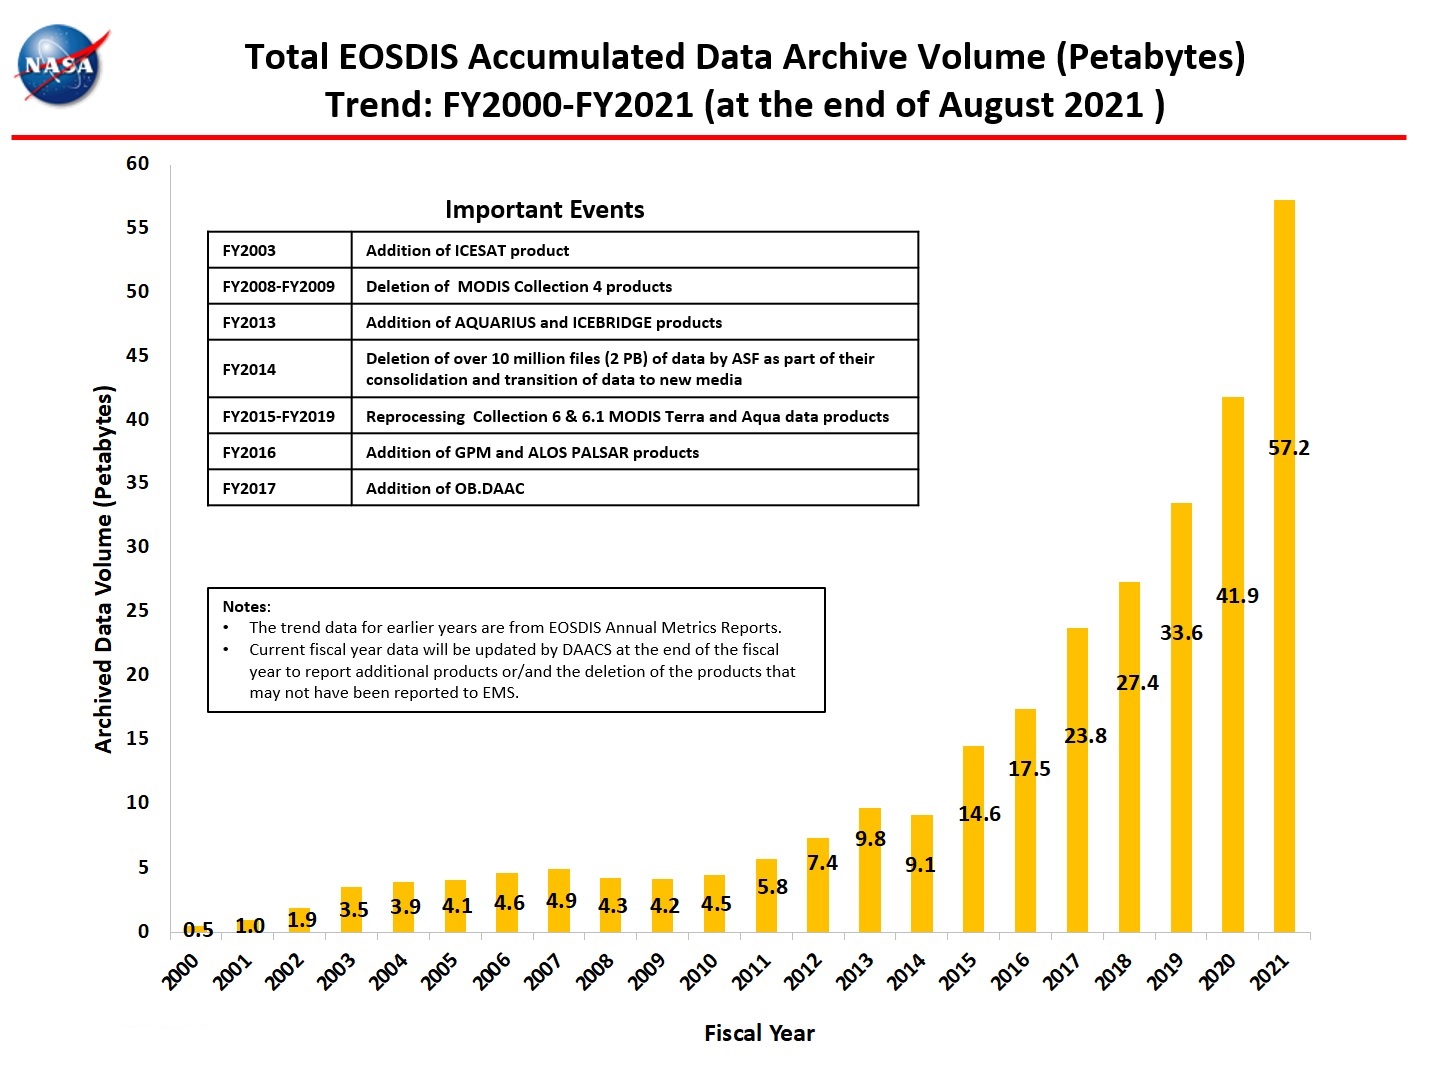 Total Accumulated Data Archive FY2000-2021